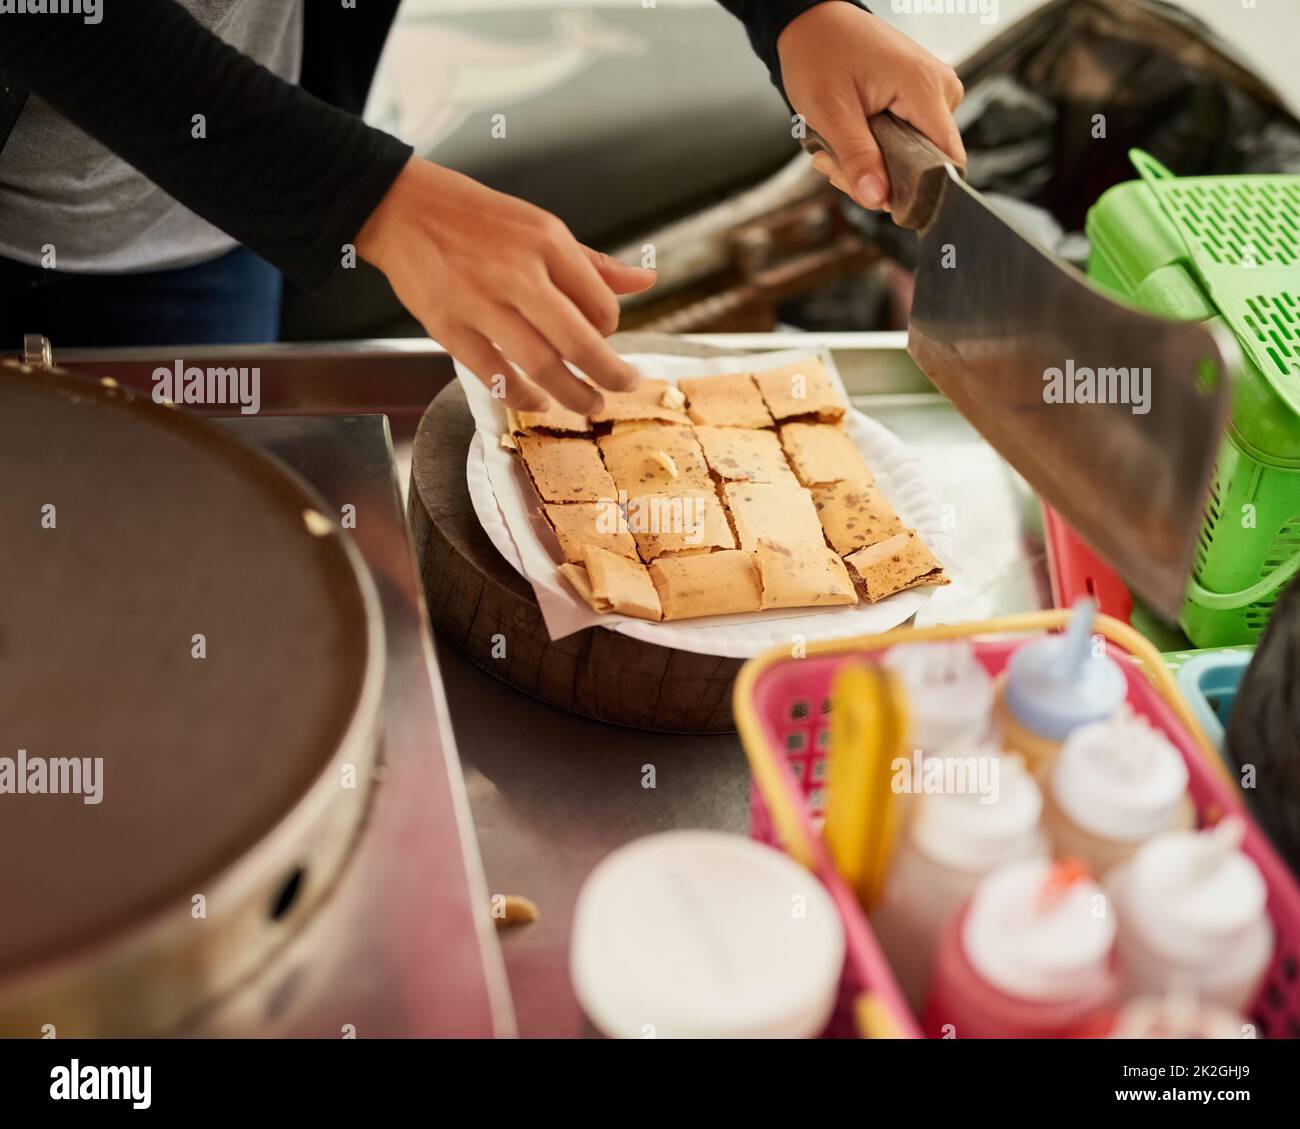 Fresh and delicious. Shot of an unidentifiable food vendor in Thailand preparing a tasty snack. Stock Photo